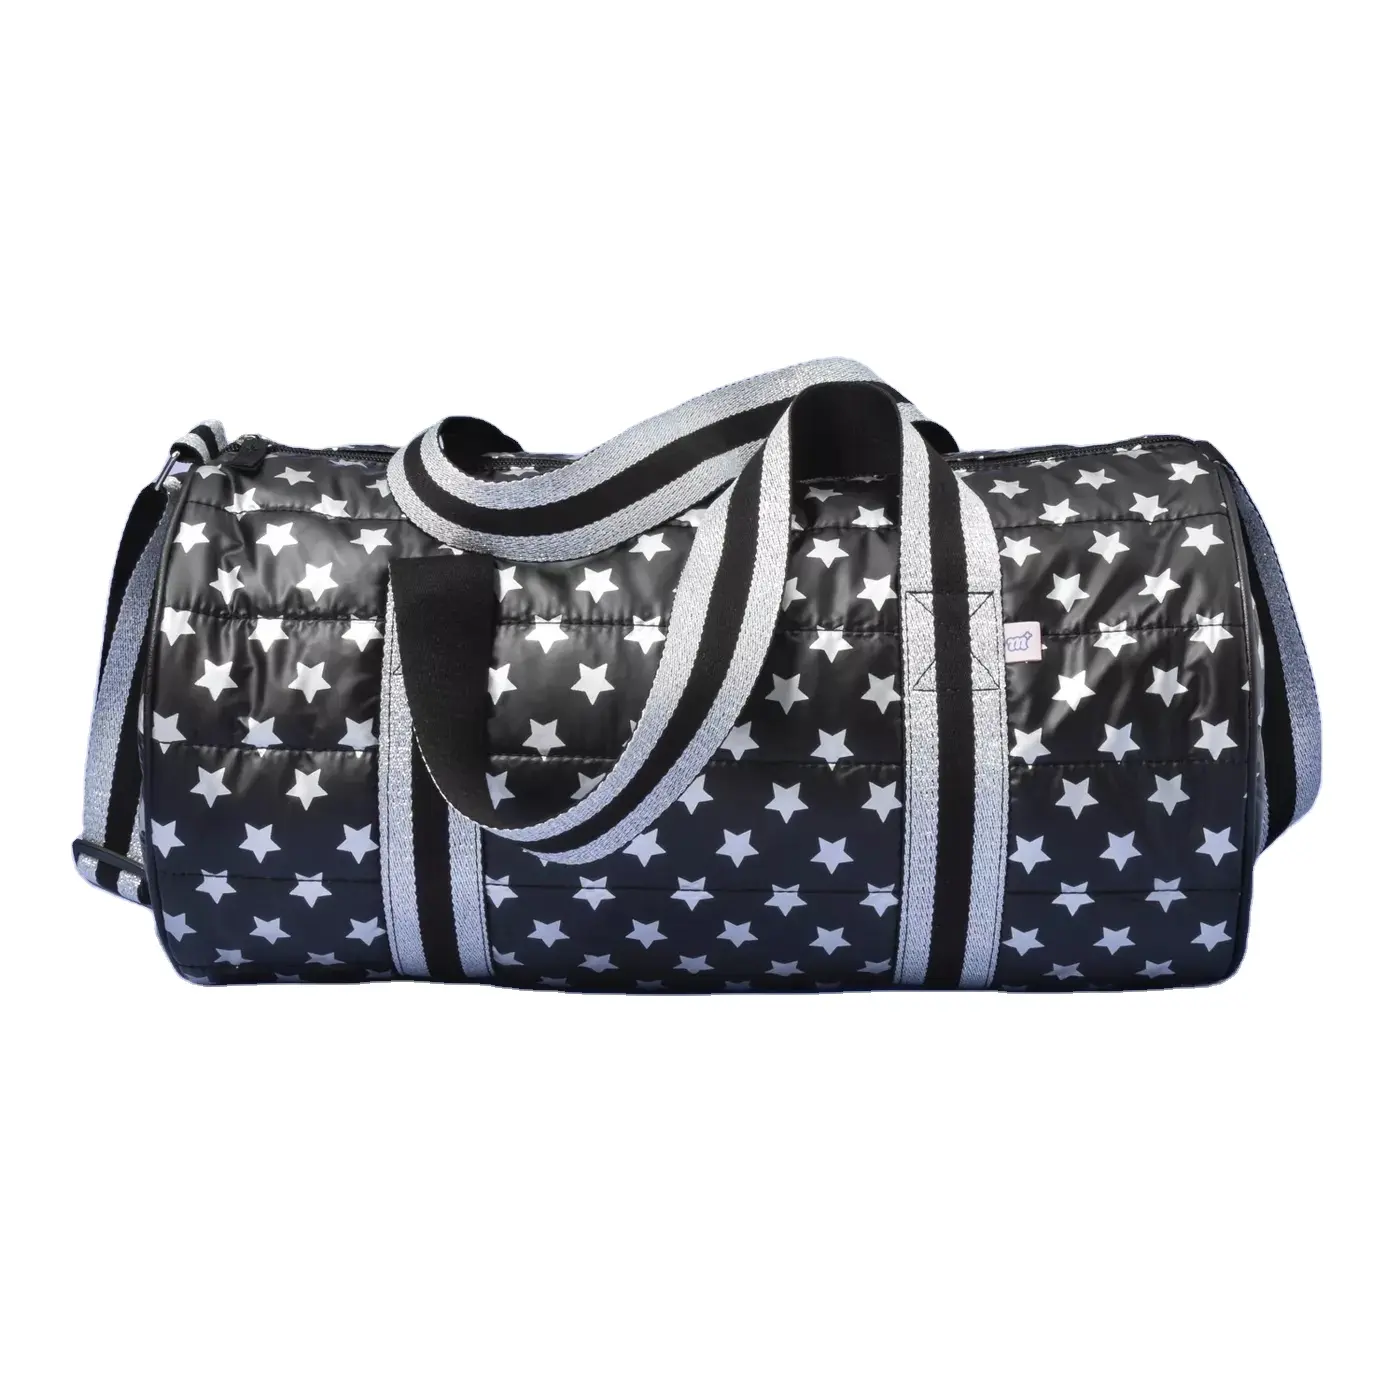 Low rate new arrival hot sale Travel Go Out good quality Portable Large Stylish Waterproof sports sublimation bag